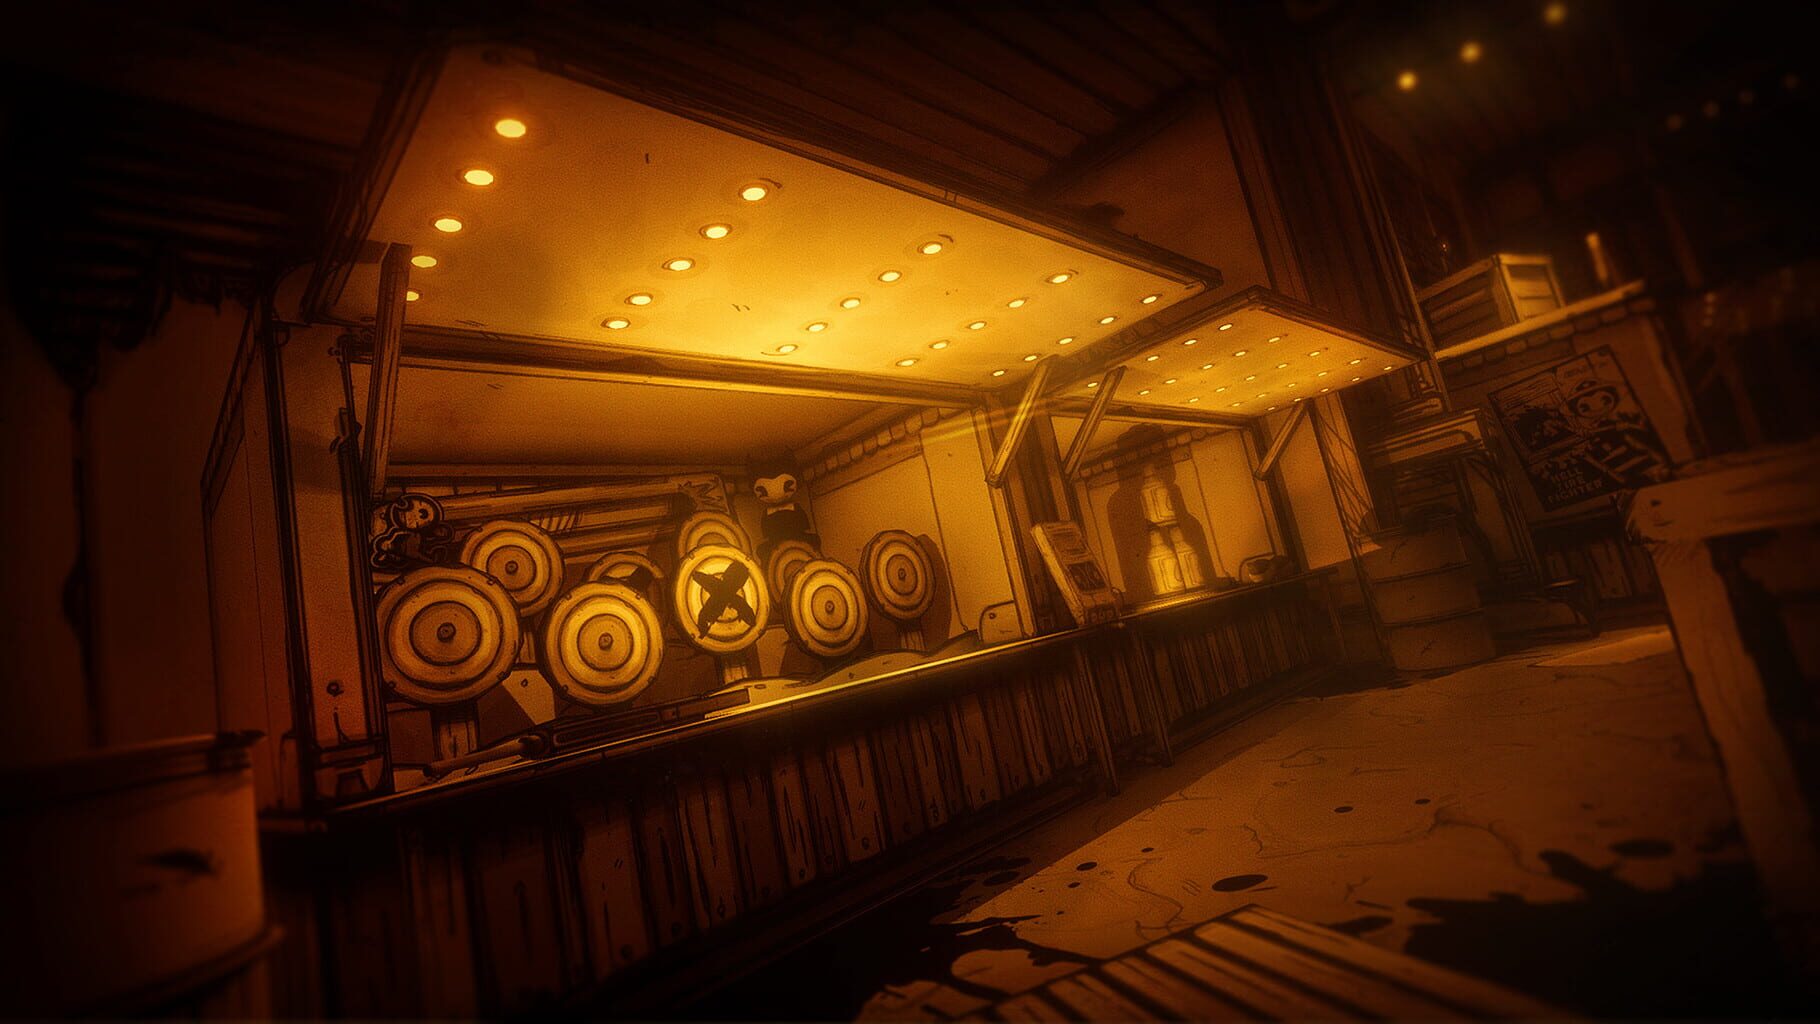 Bendy and the Ink Machine: Chapter Four screenshot